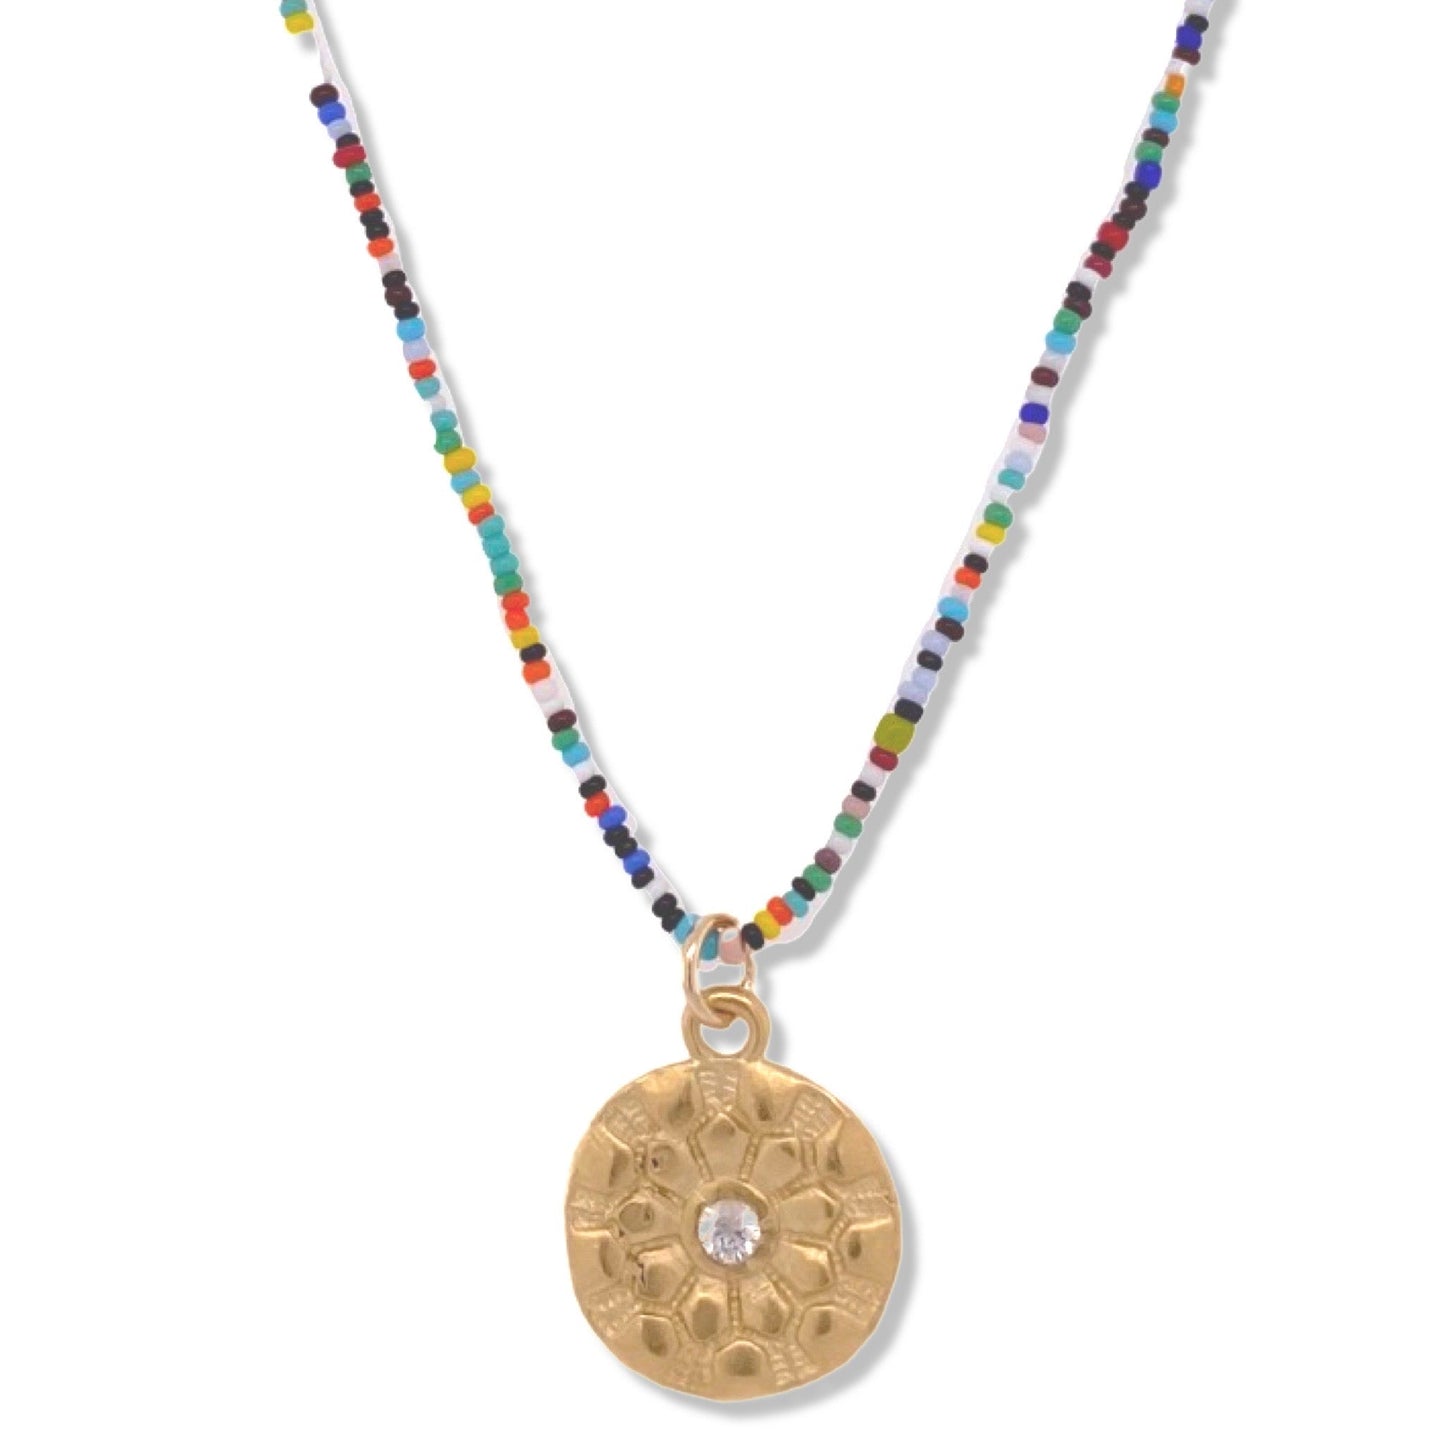 Mara Necklace in Gold on Micro Multi Color Beads | Nalu | Nantucket